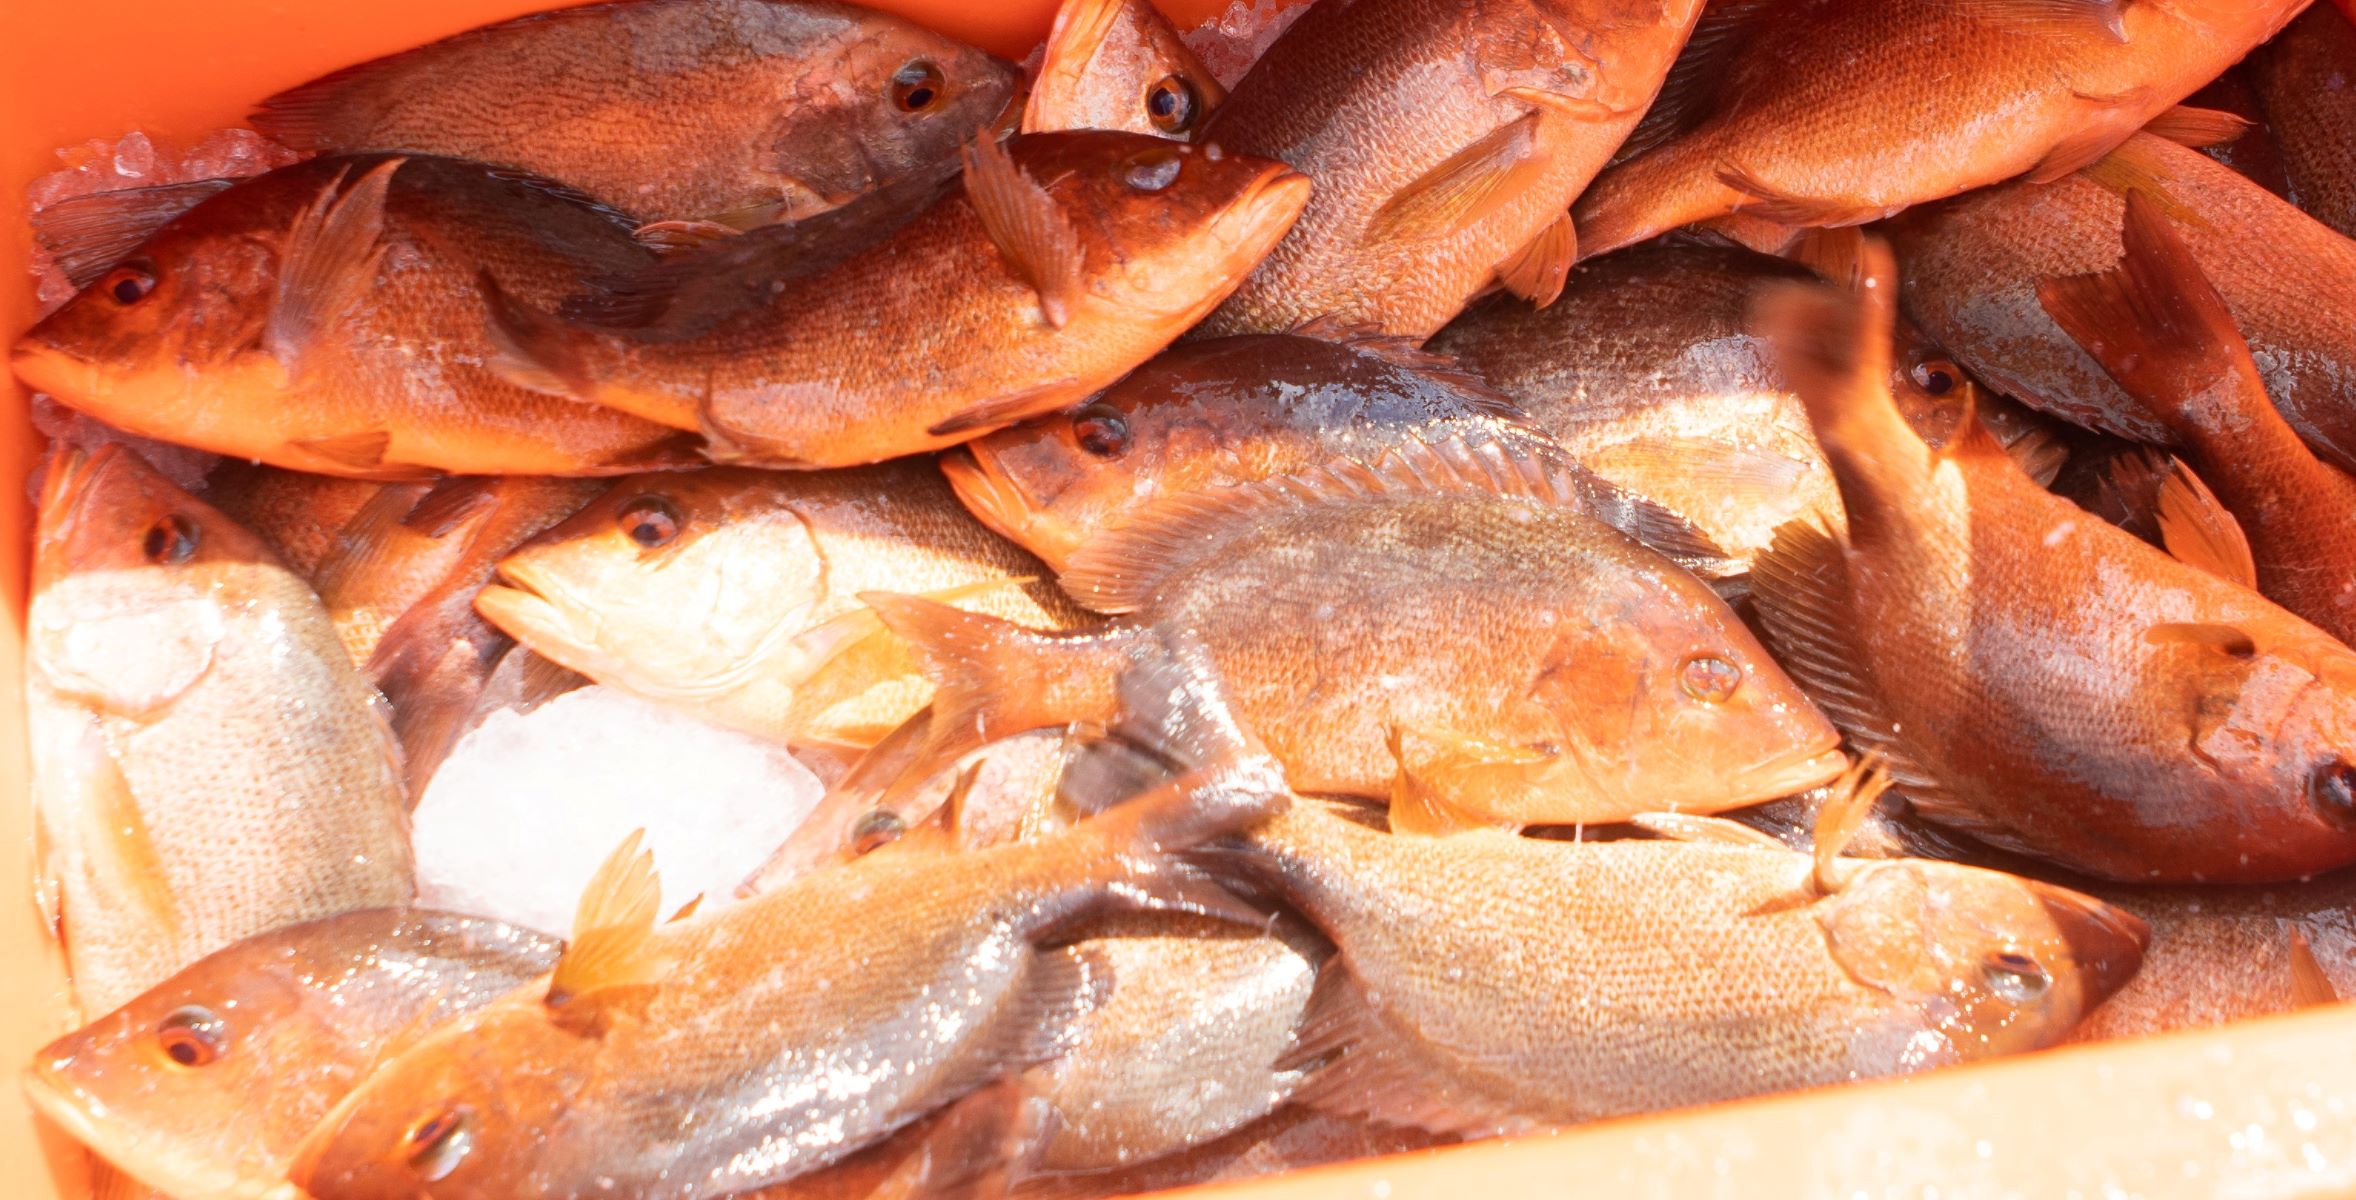 Locally farmed red snappers